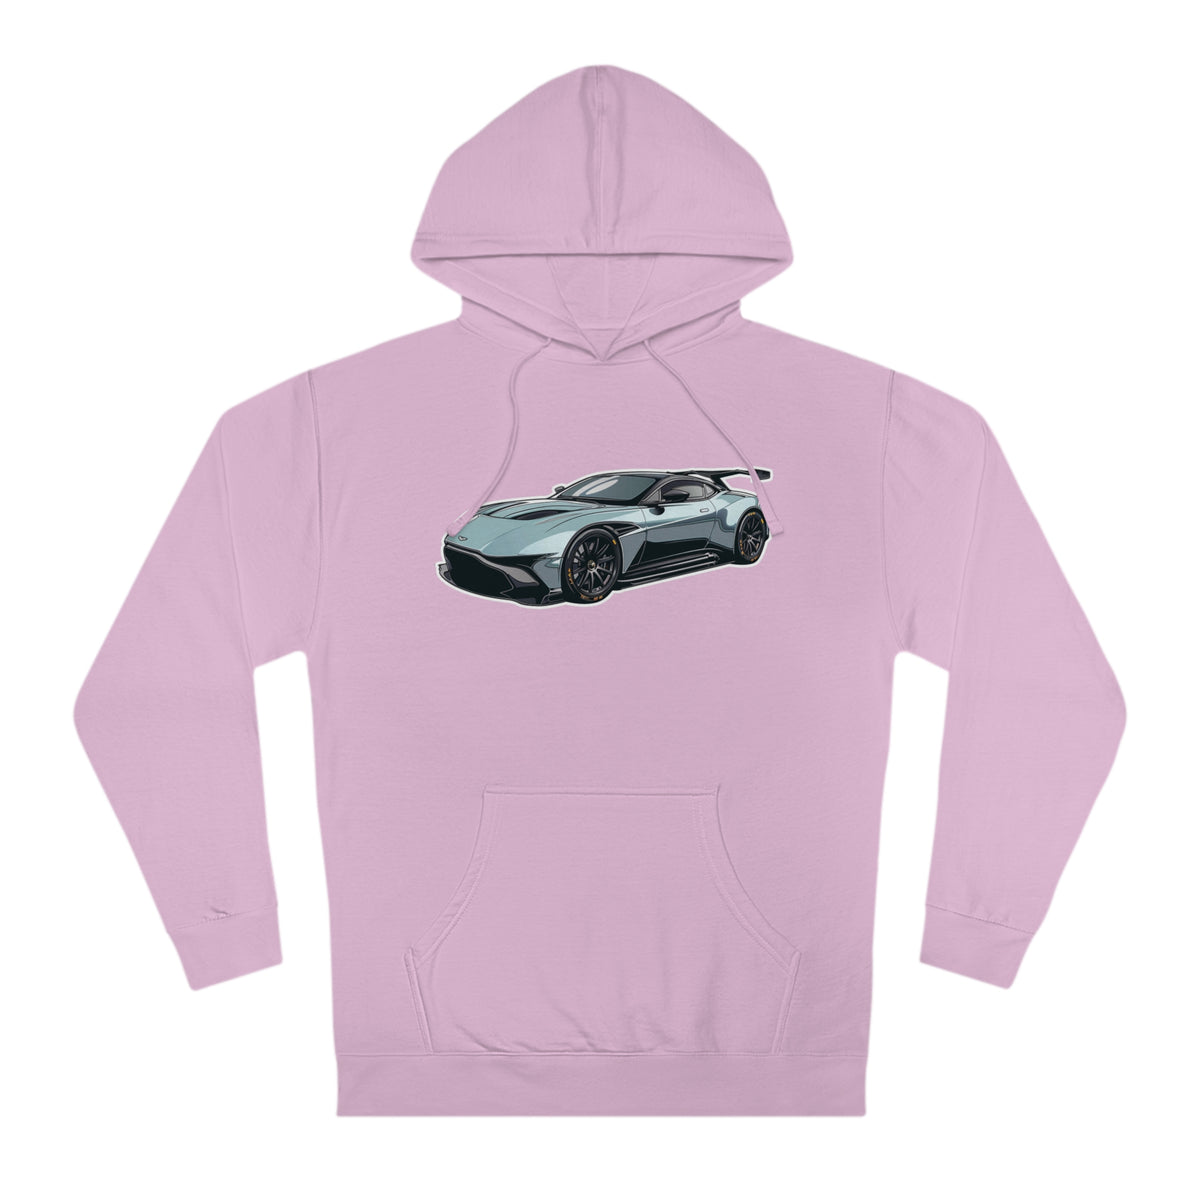 Turbo Thrill Men's Hoodie with Exclusive Aston Martin Graphic Hooded Sweatshirt